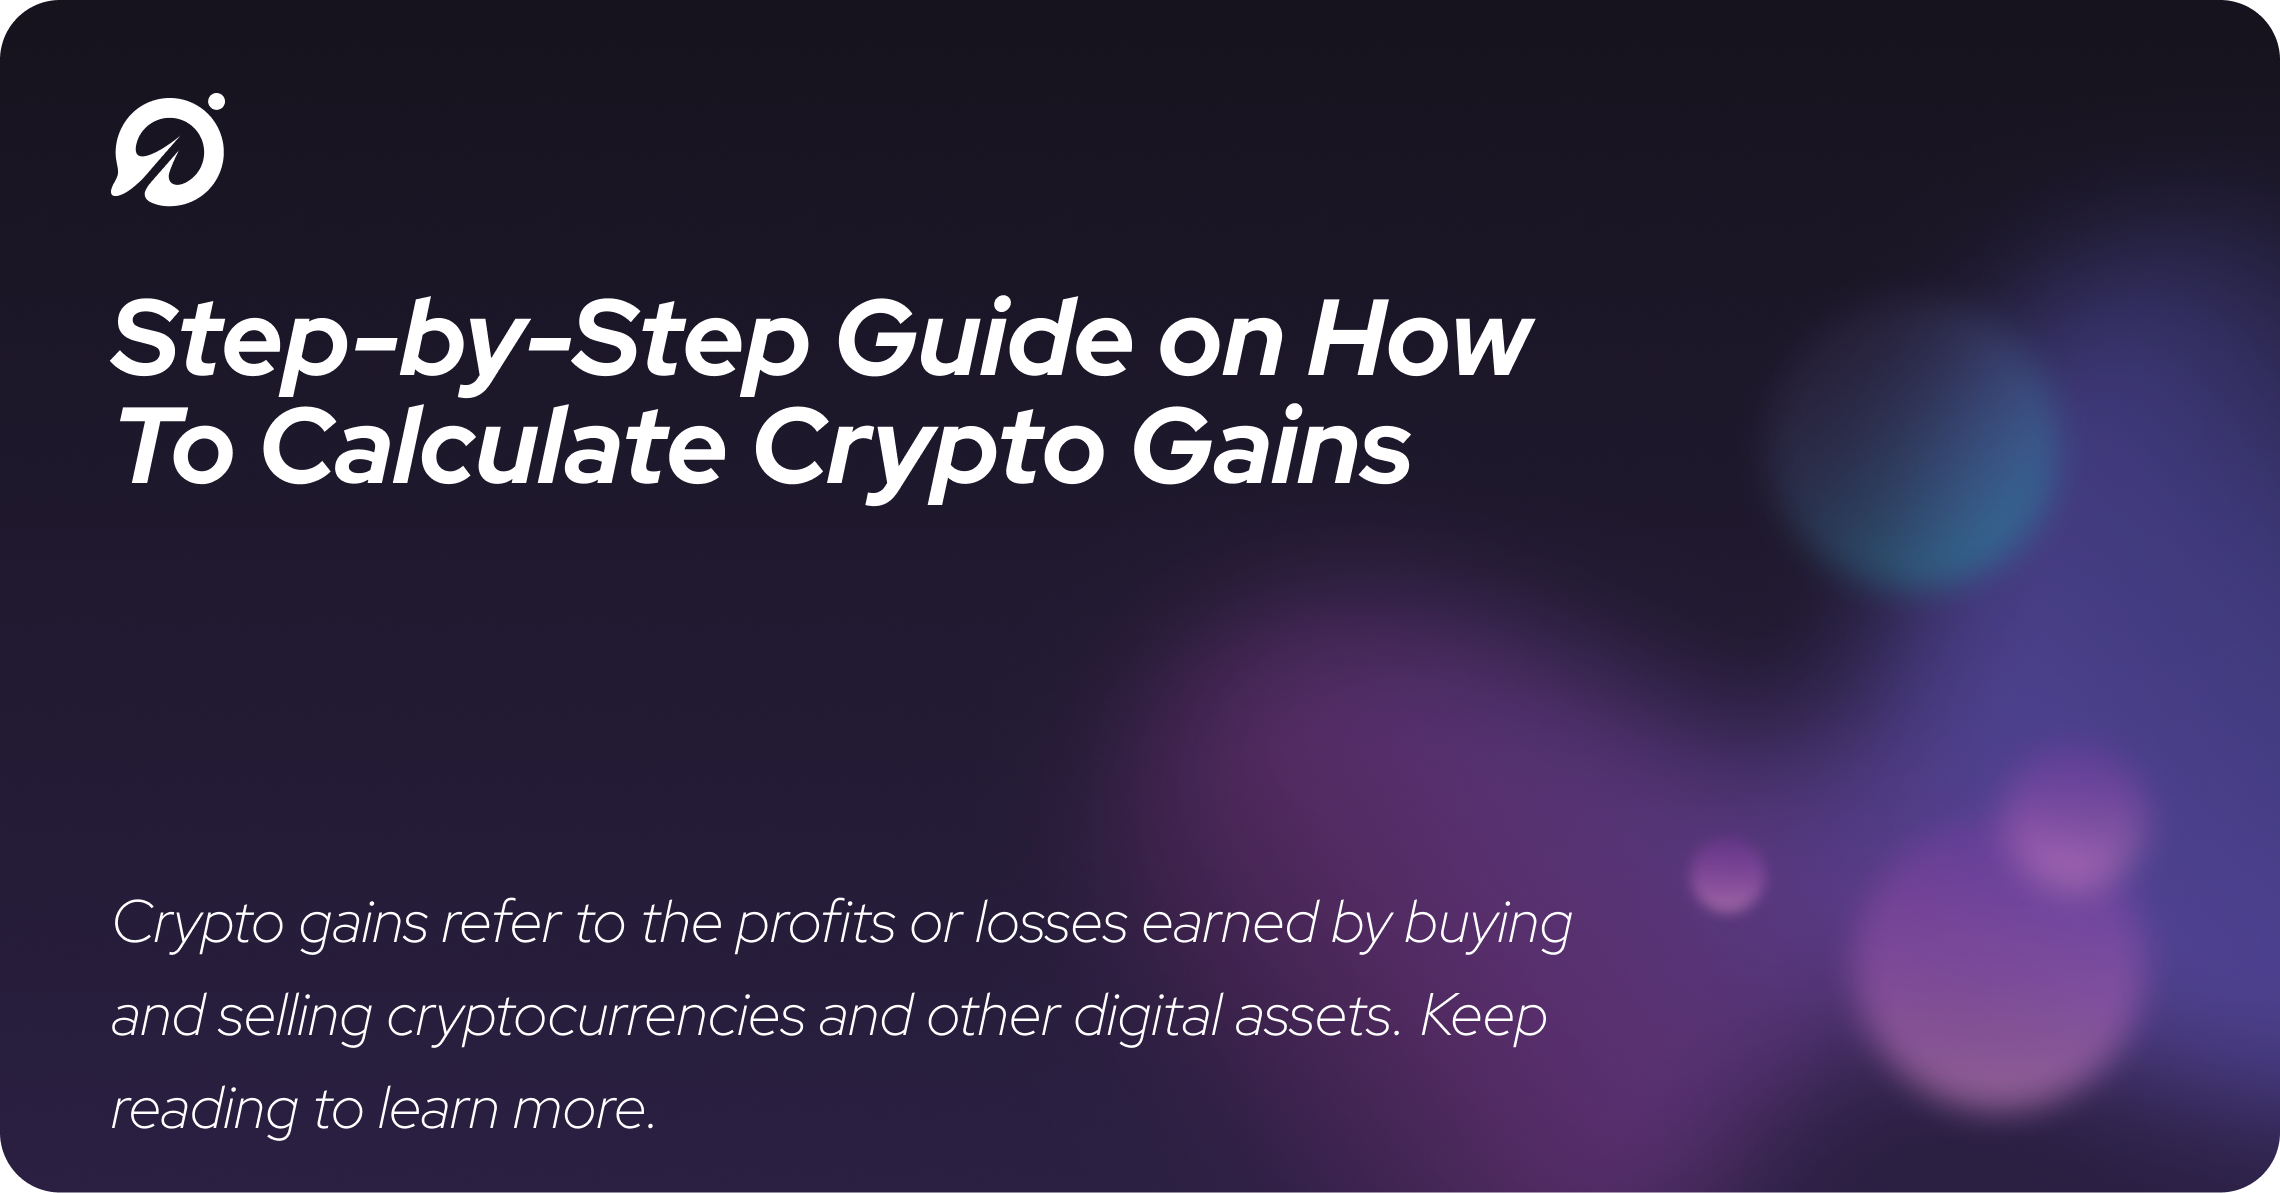 Step-by-Step Guide on How To Calculate Crypto Gains